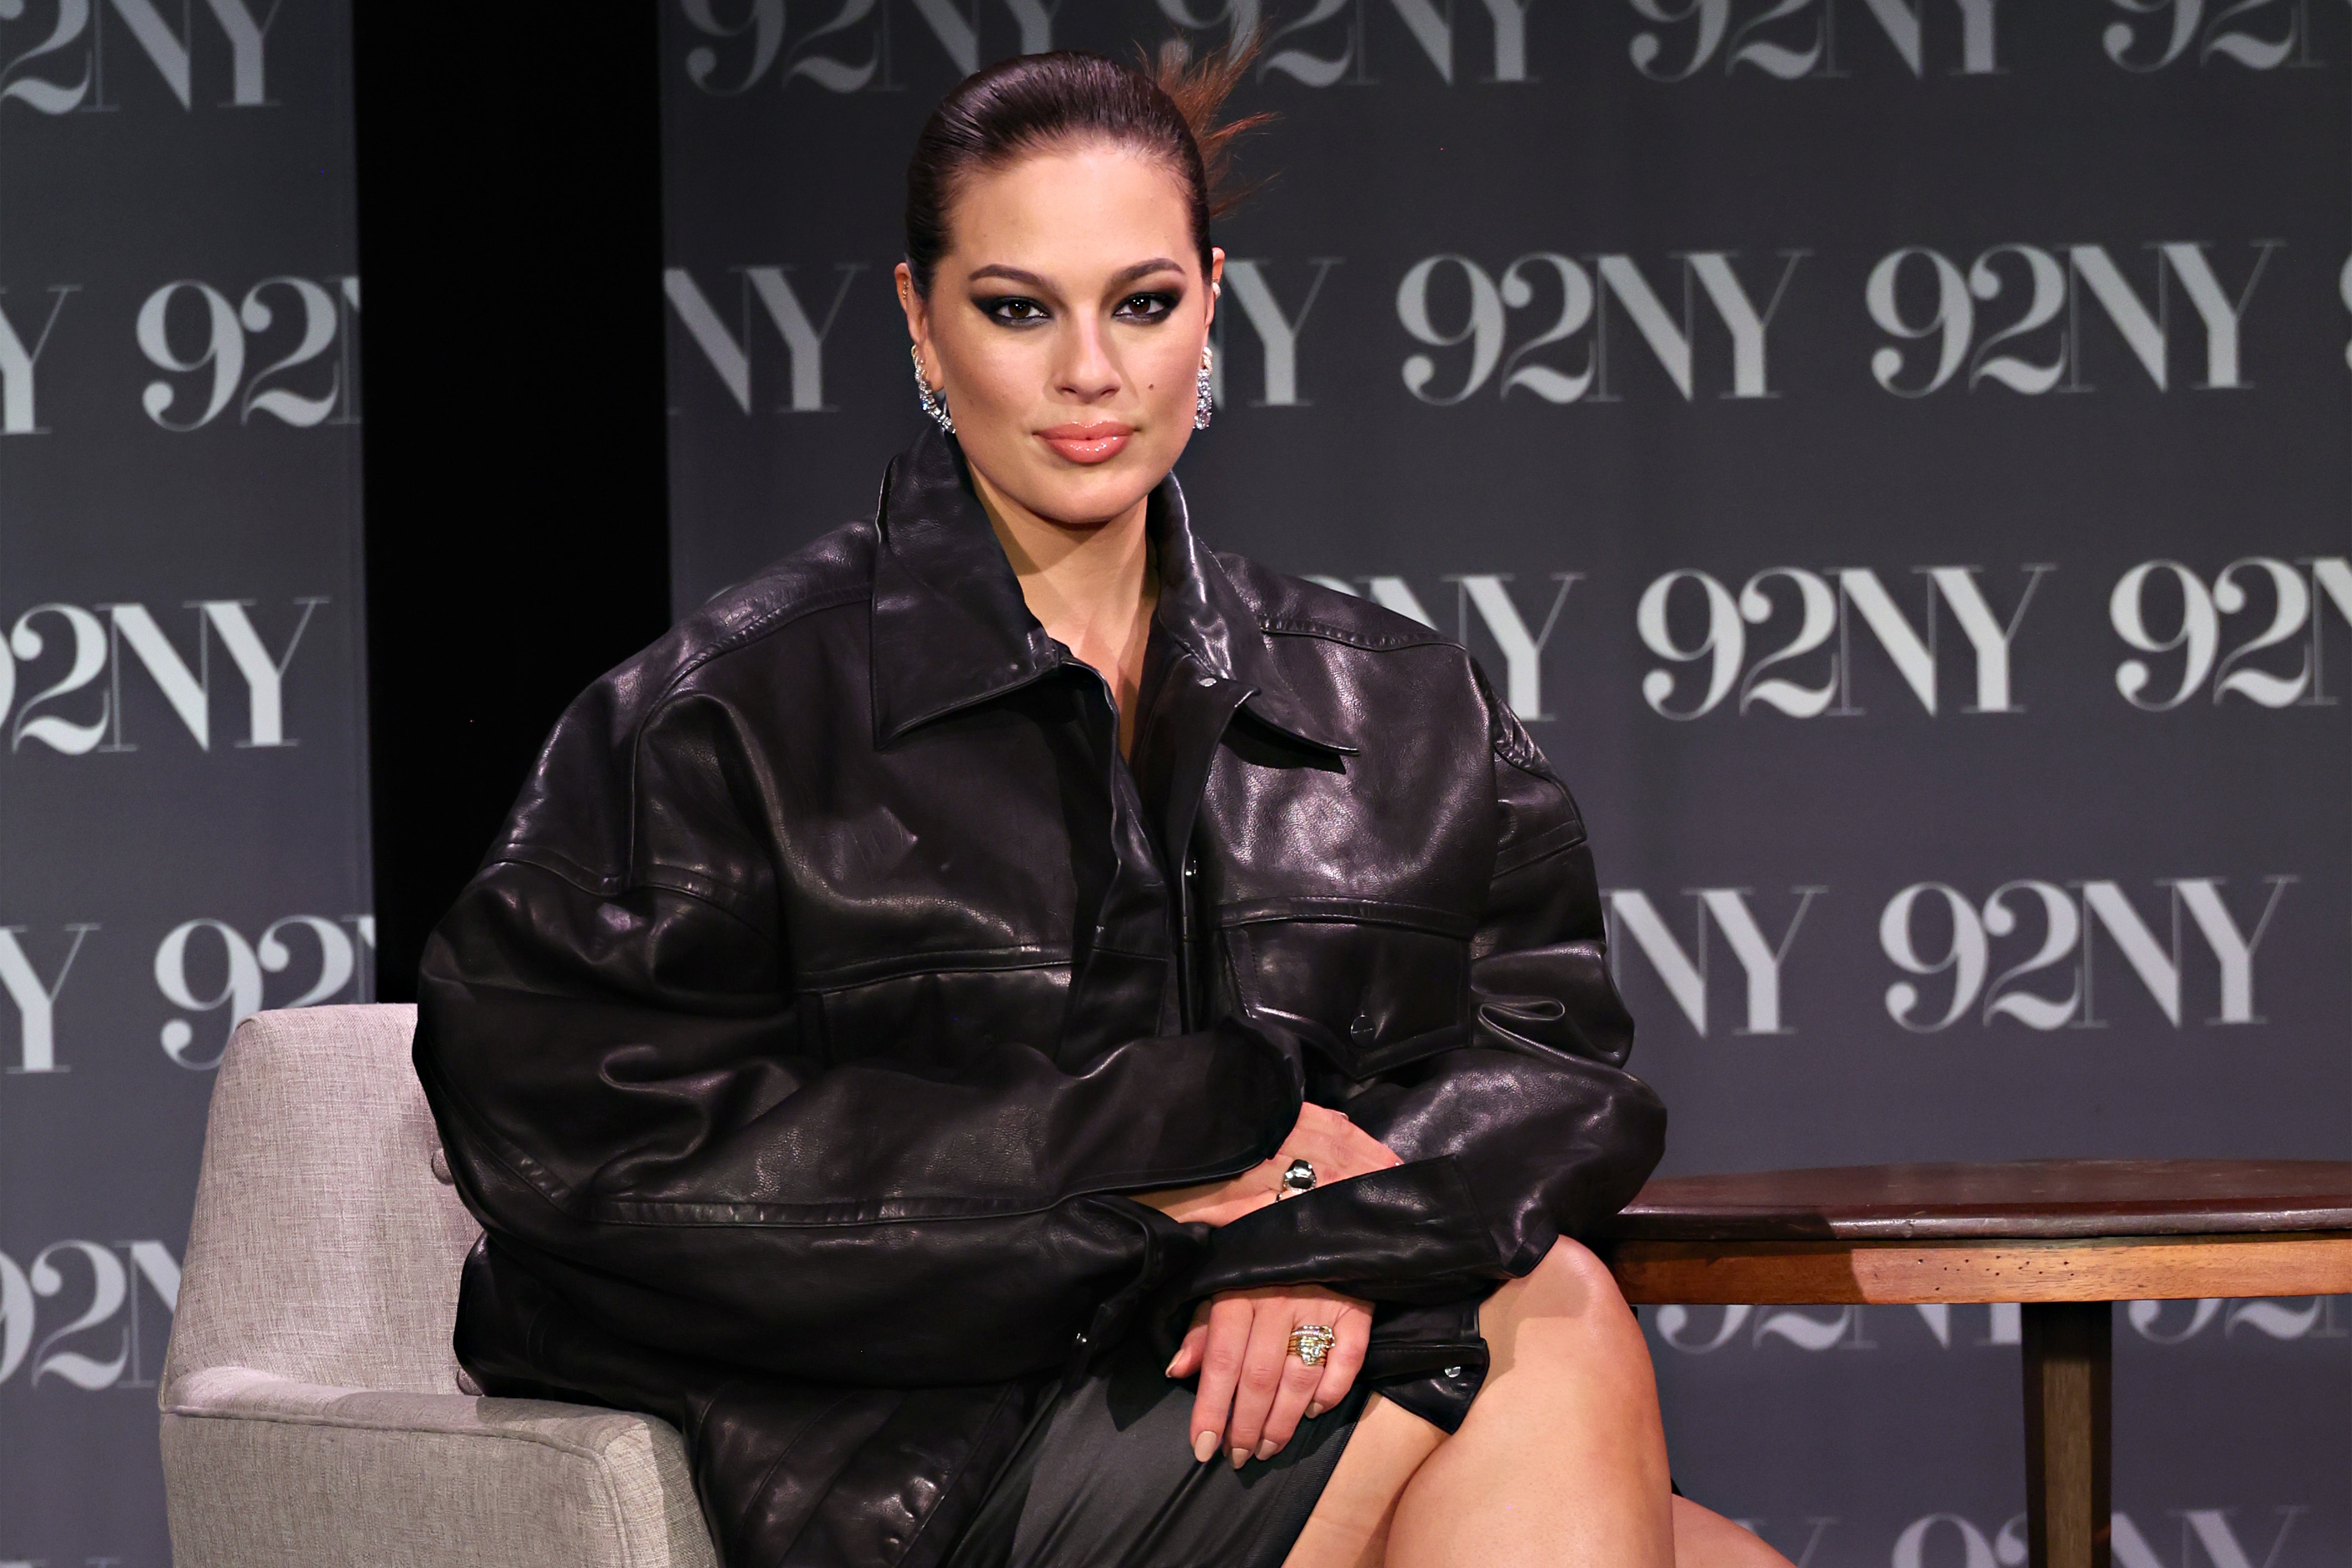 Ashley Graham Accurately Describes Life with 3 Kids Under Age 3